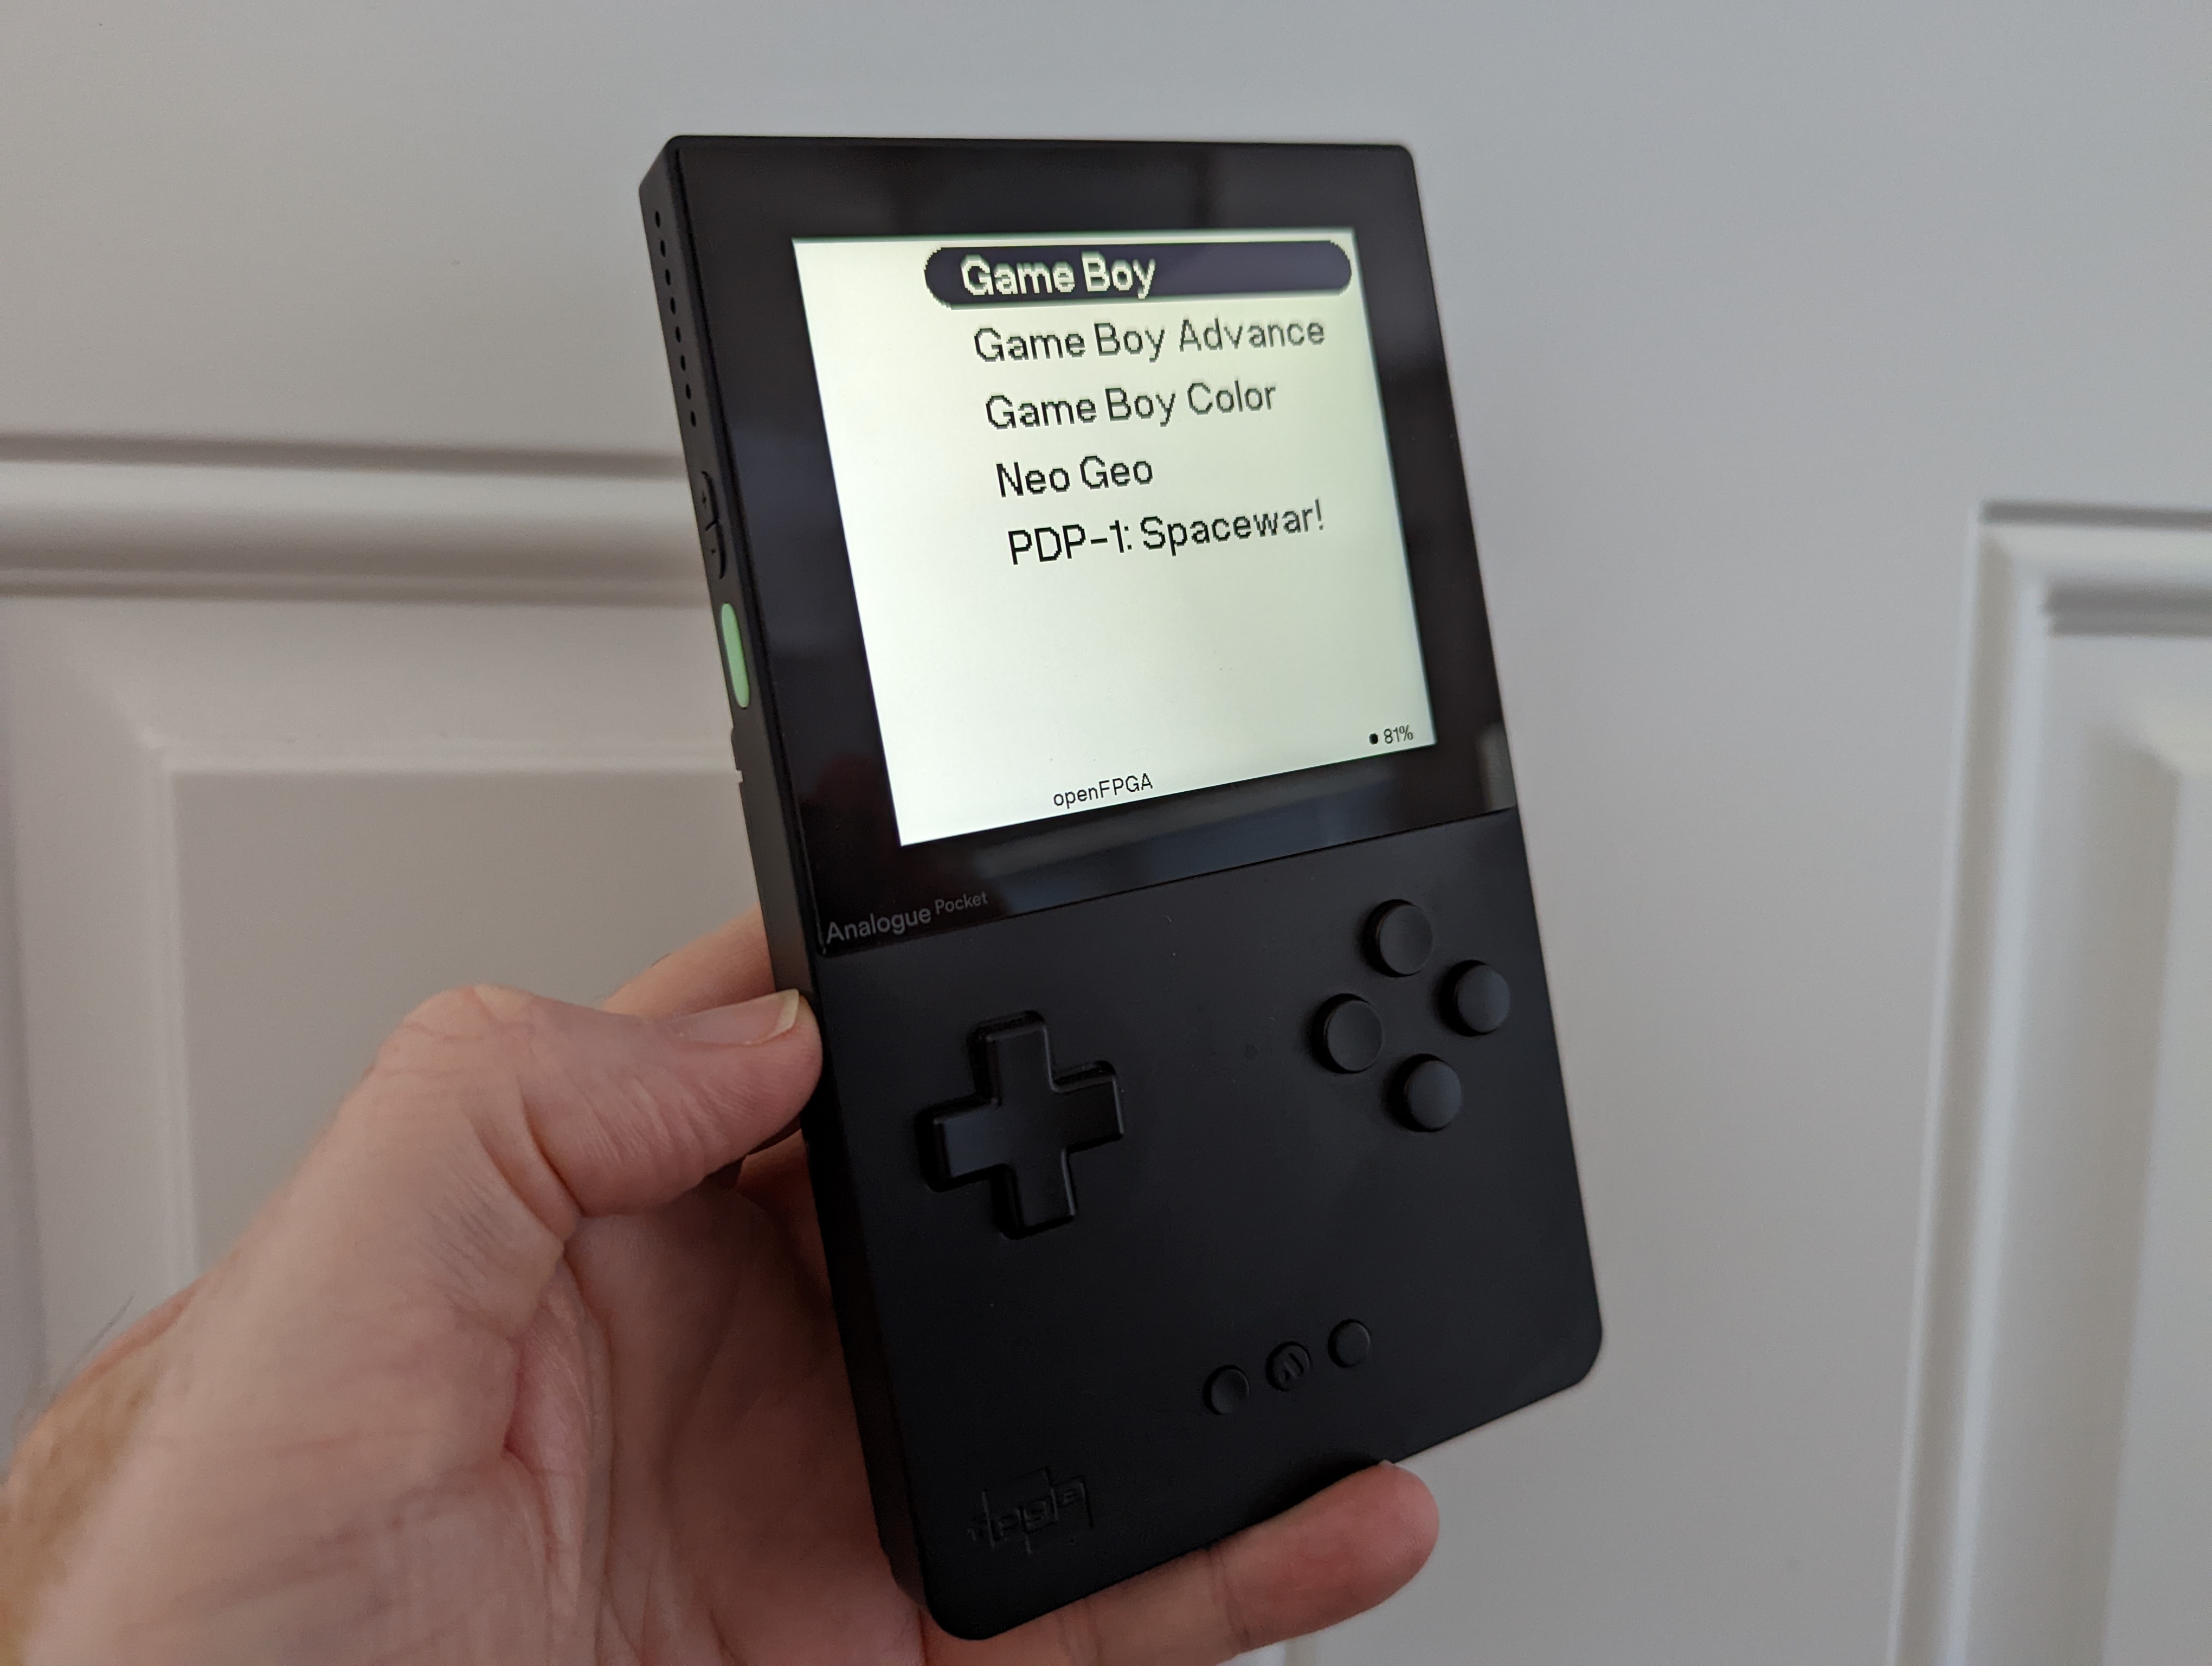 Analogue Pocket can now run ROMs thanks to openFPGA update